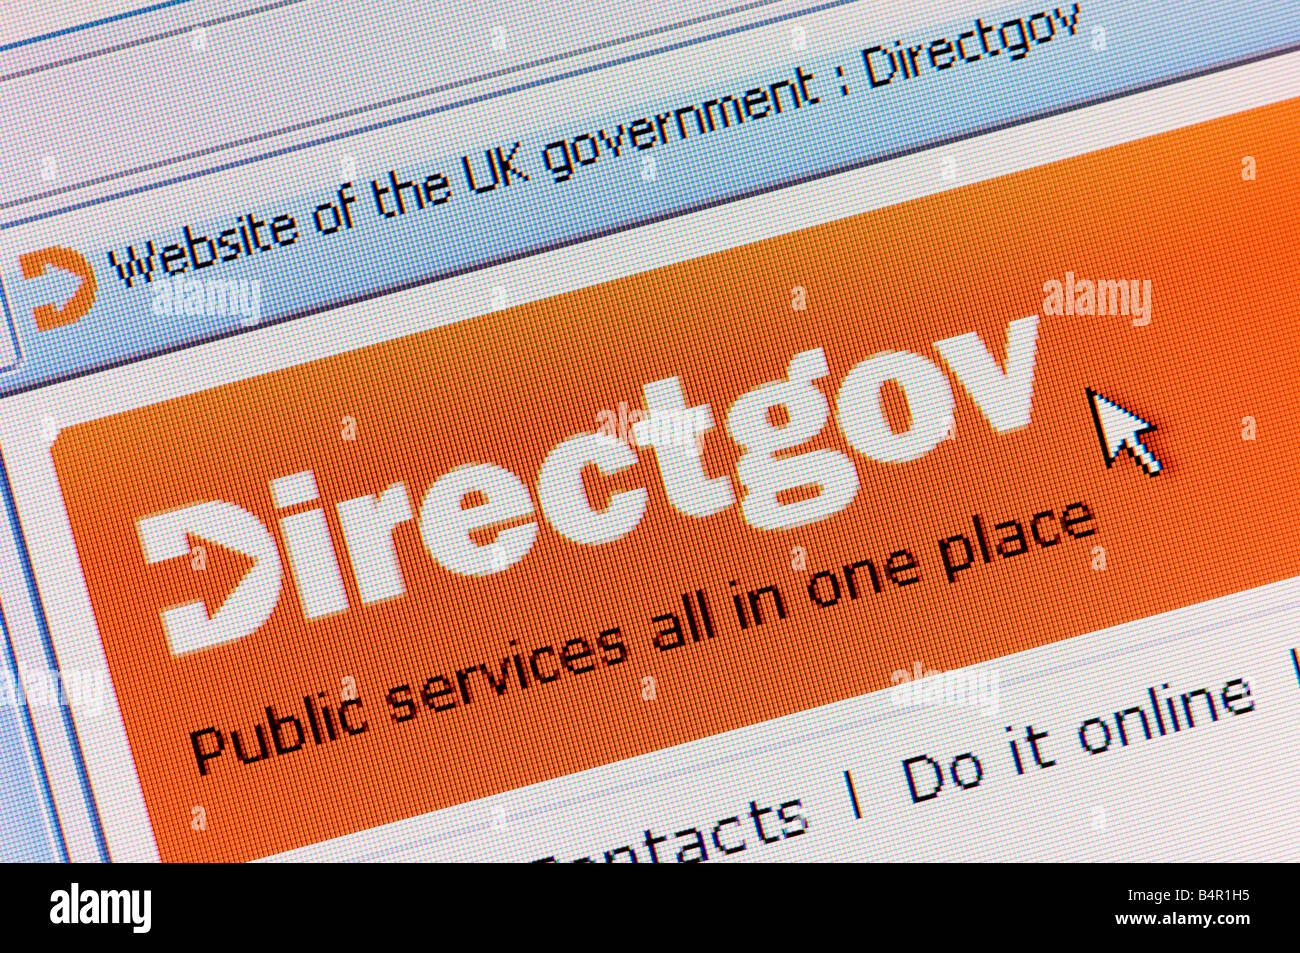 Macro screenshot of Directgov the official UK government website Editorial use only Stock Photo